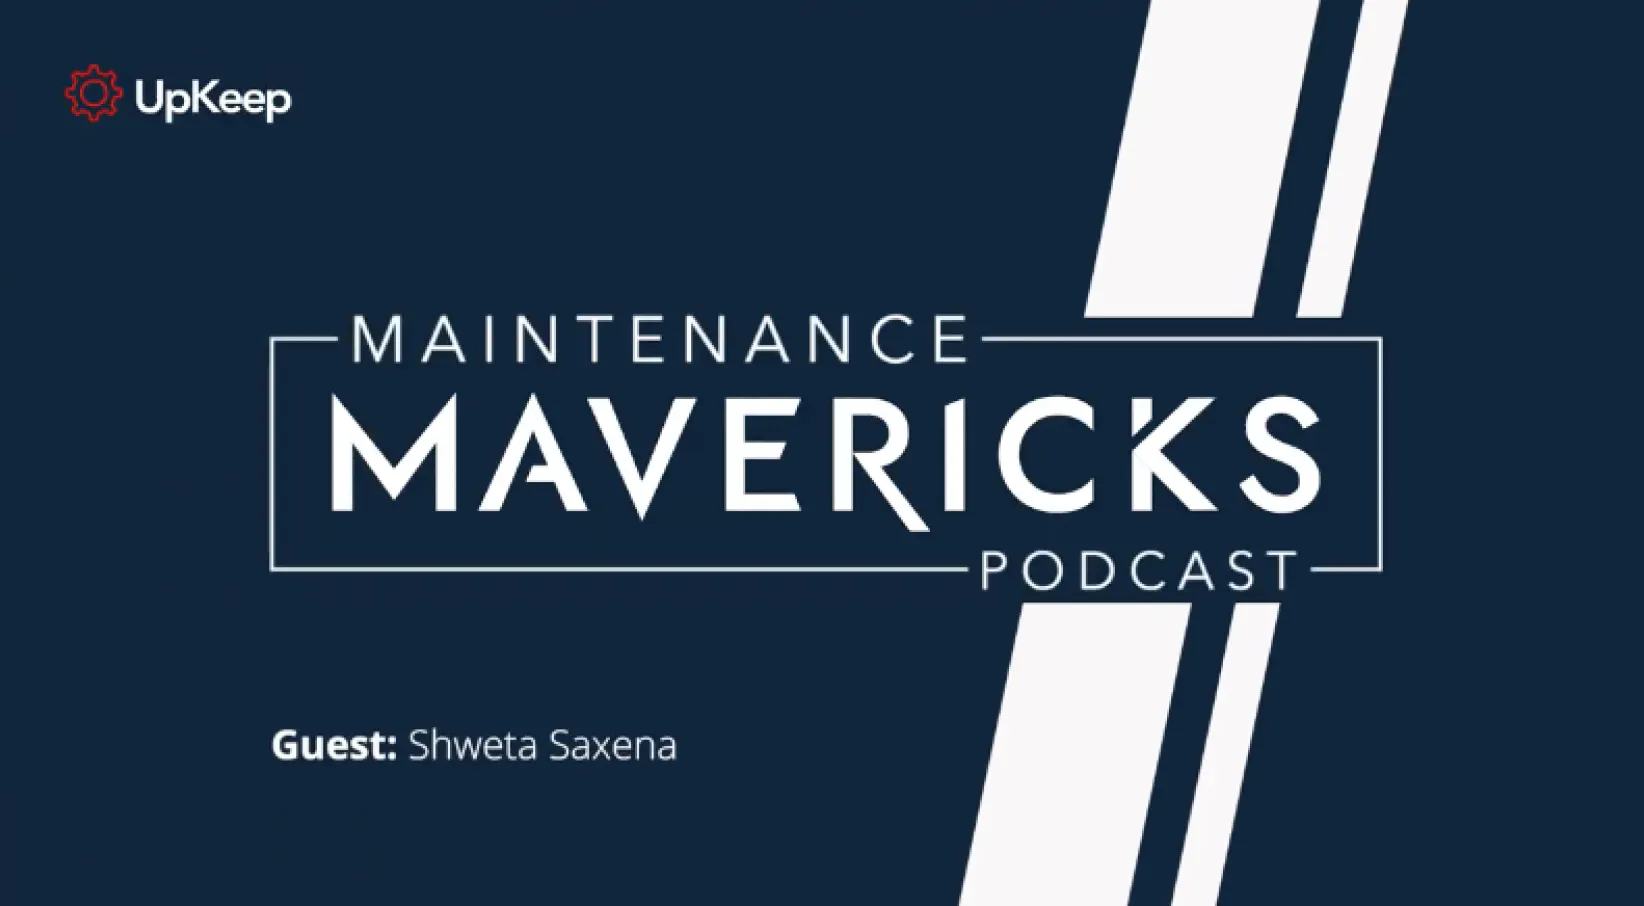 S4:E05 Innovation and Its Importance with Shweta Saxena